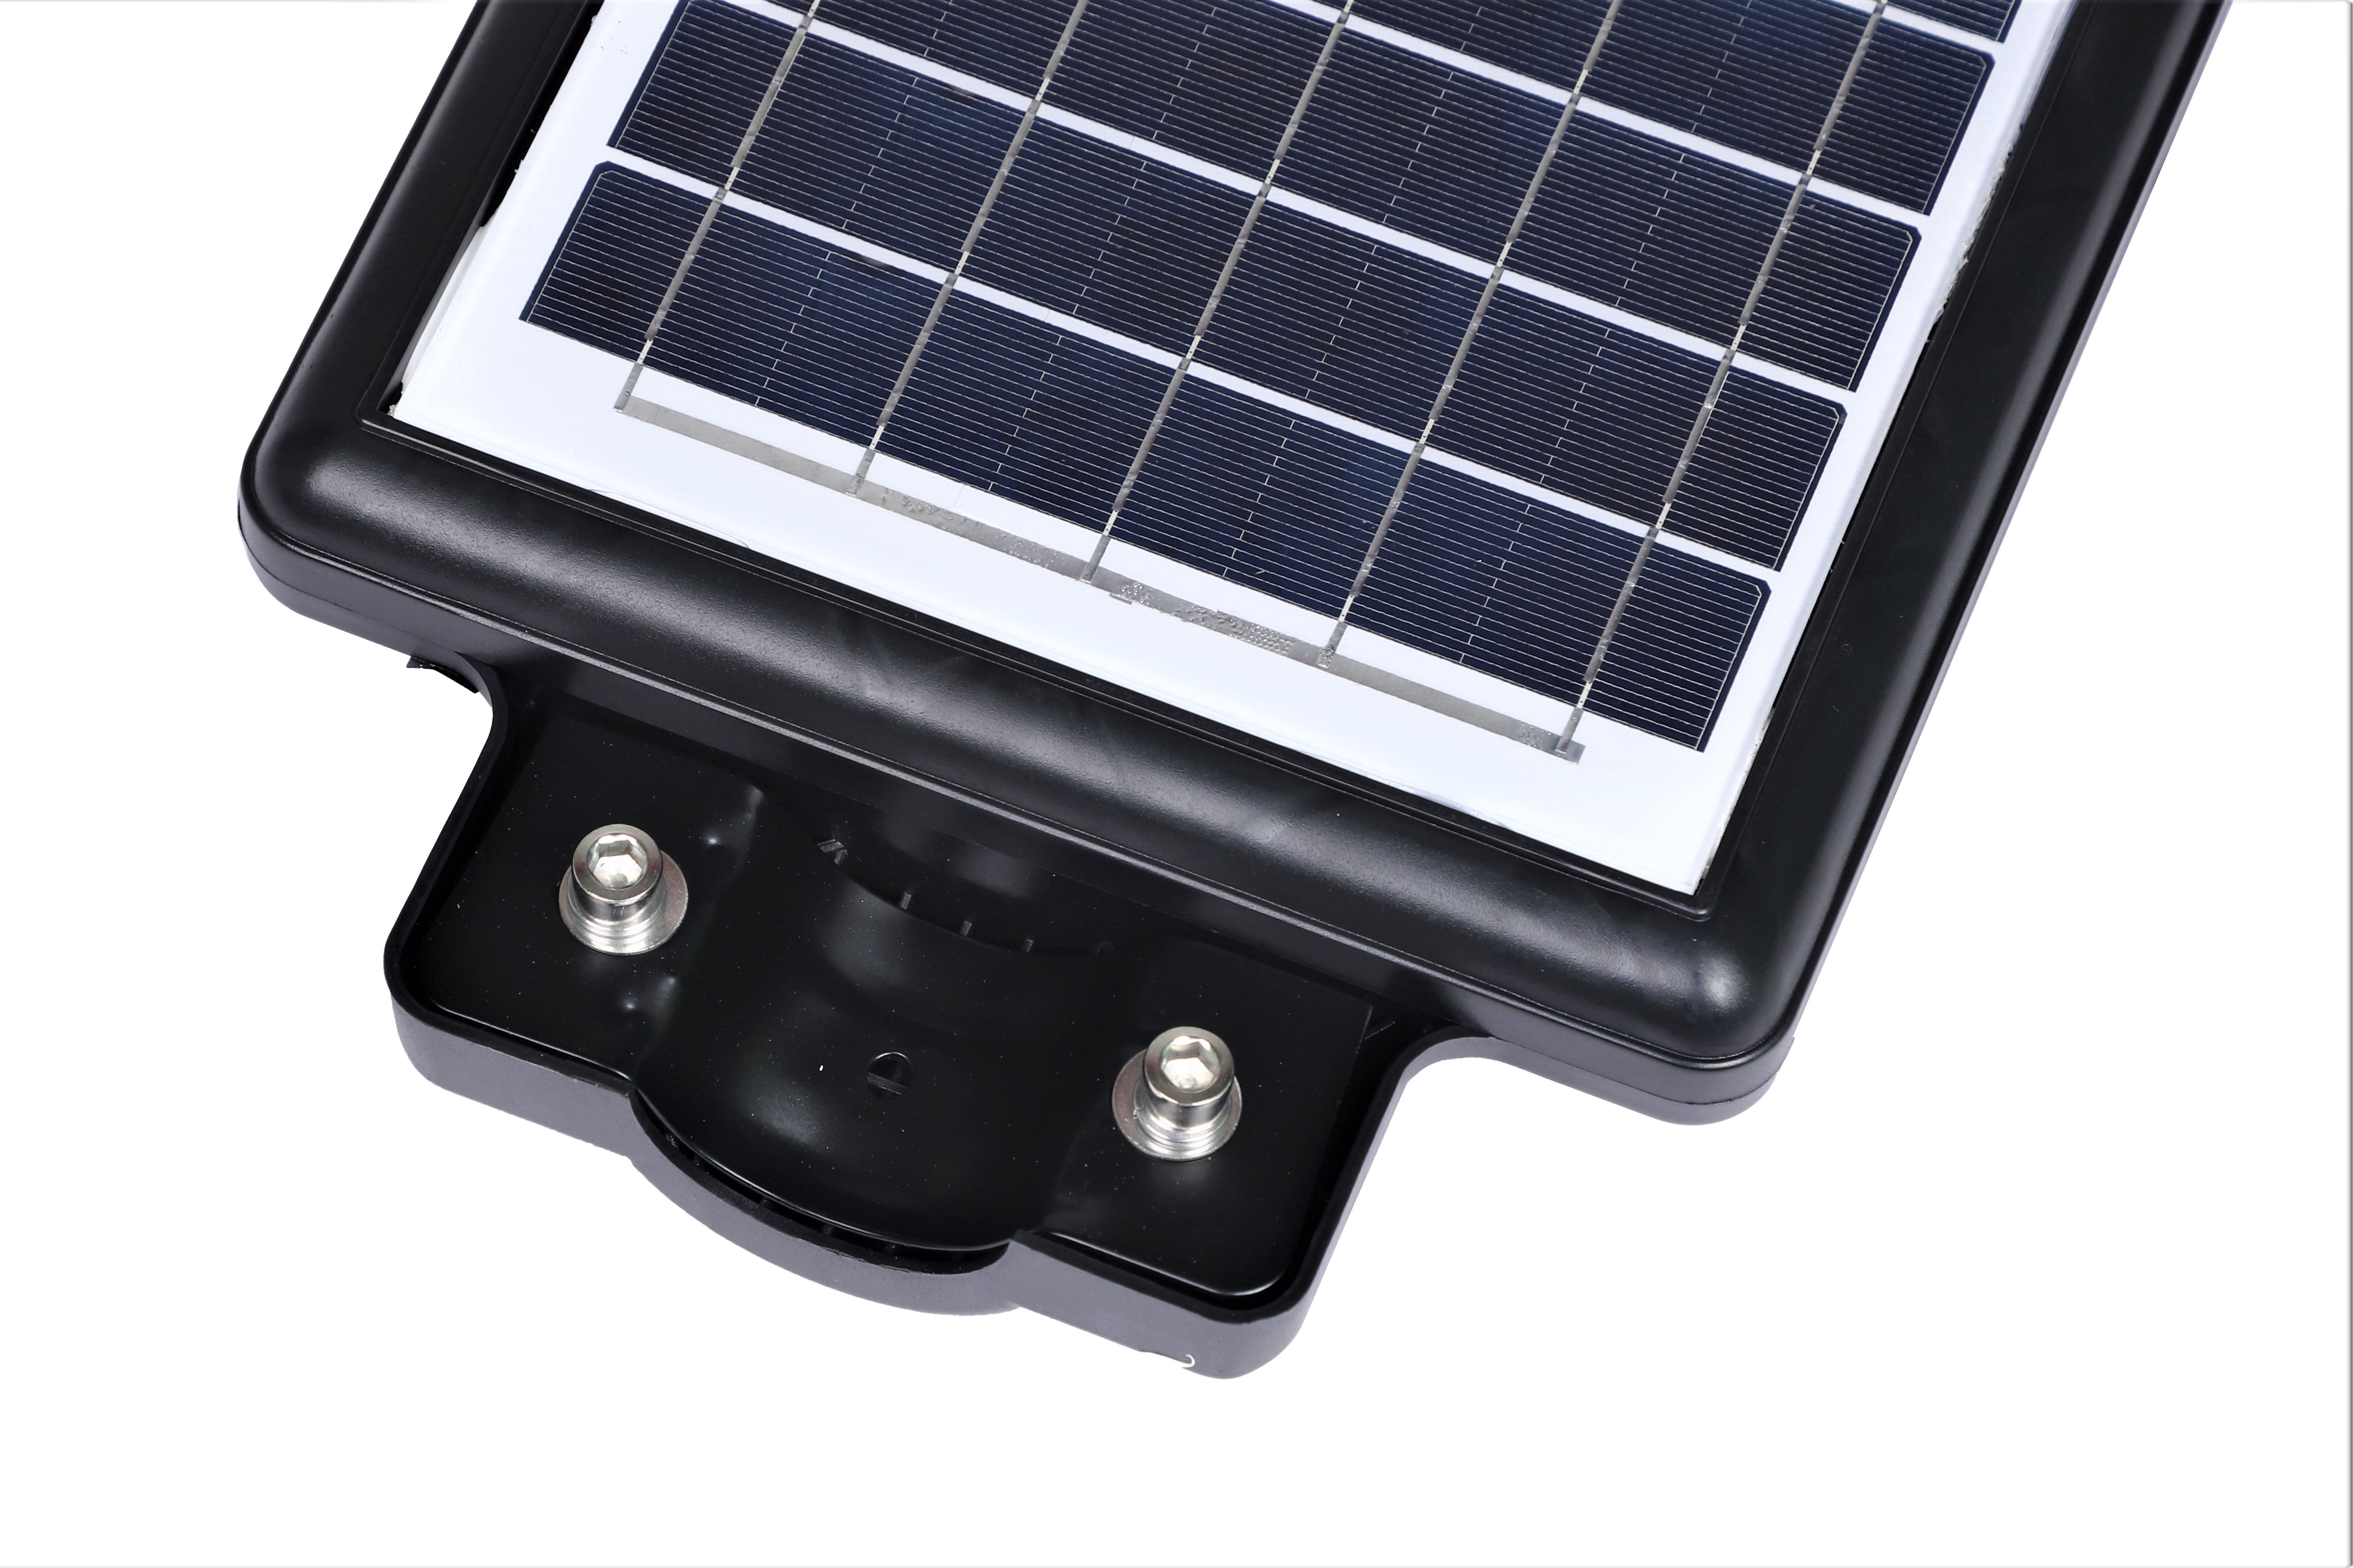 FOS Solar LED Street Light 40W with Remote Control - Cool White 6500k (IP 65 Water-Proof)